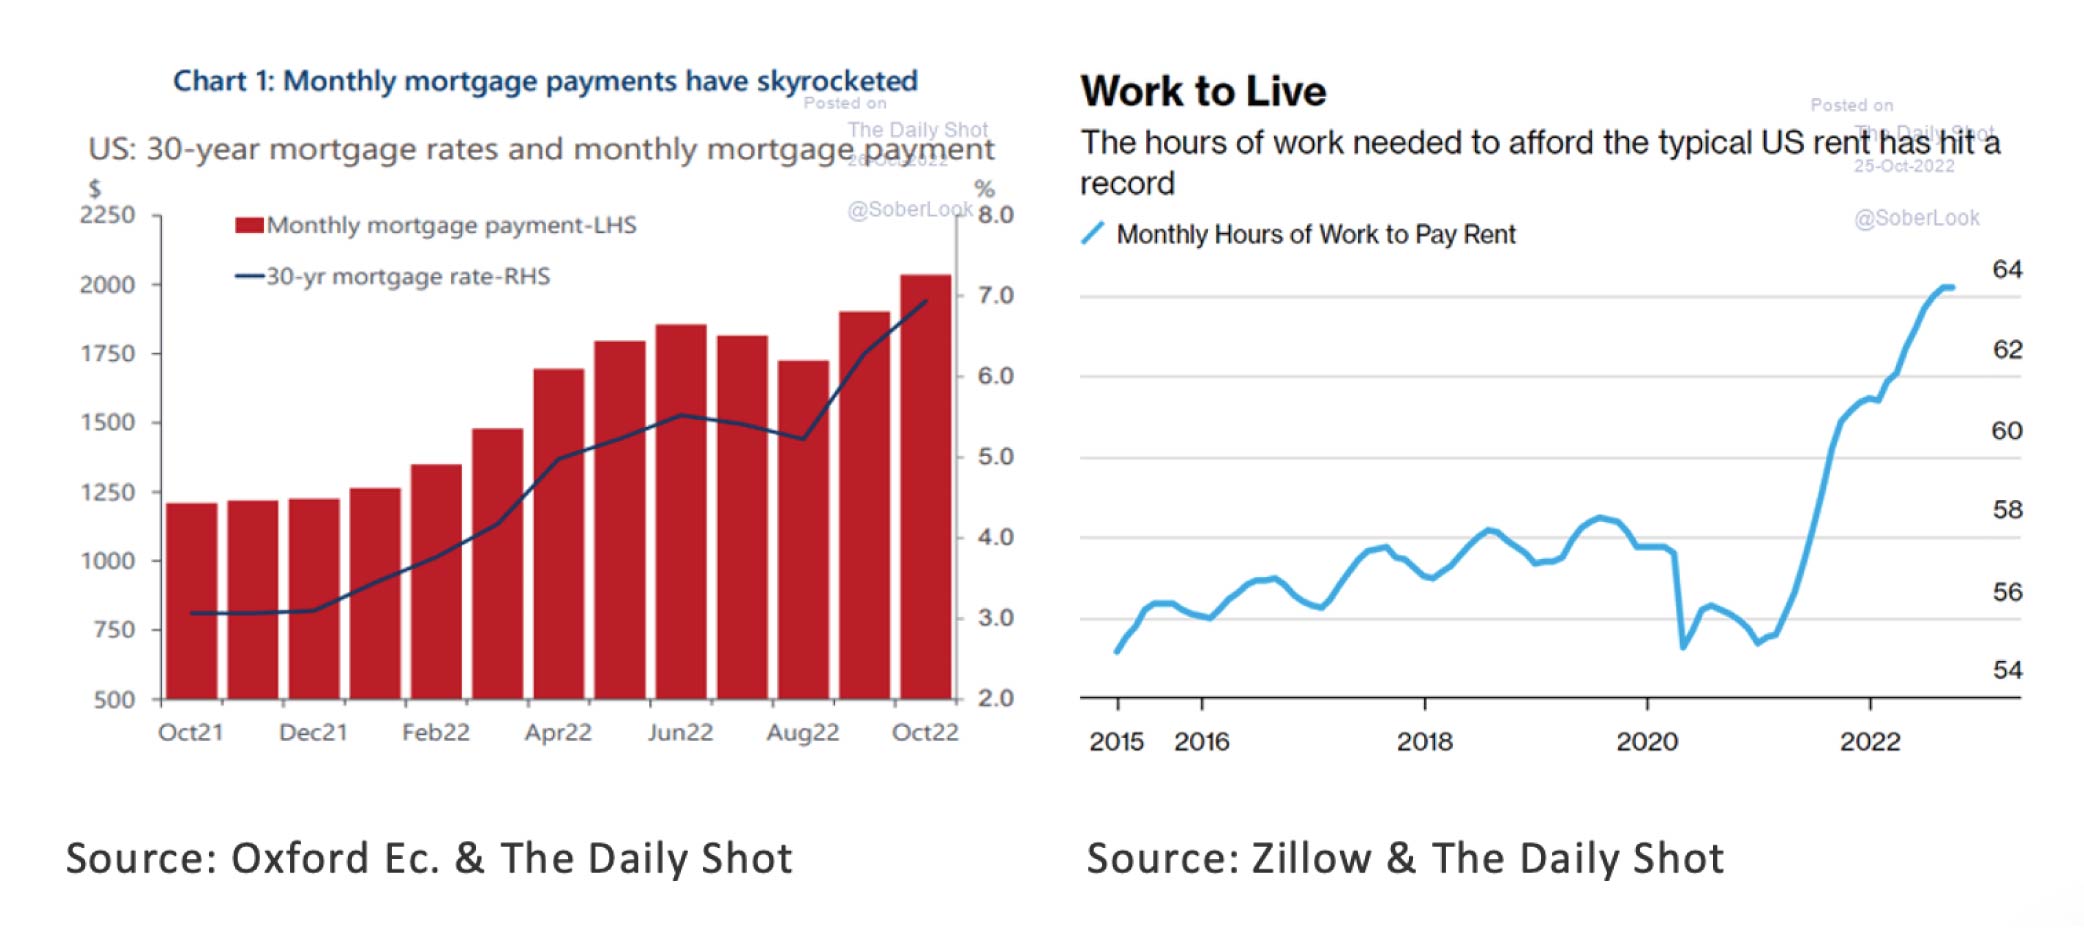 Monthly mortgage payments have skyrocketed - Nov22